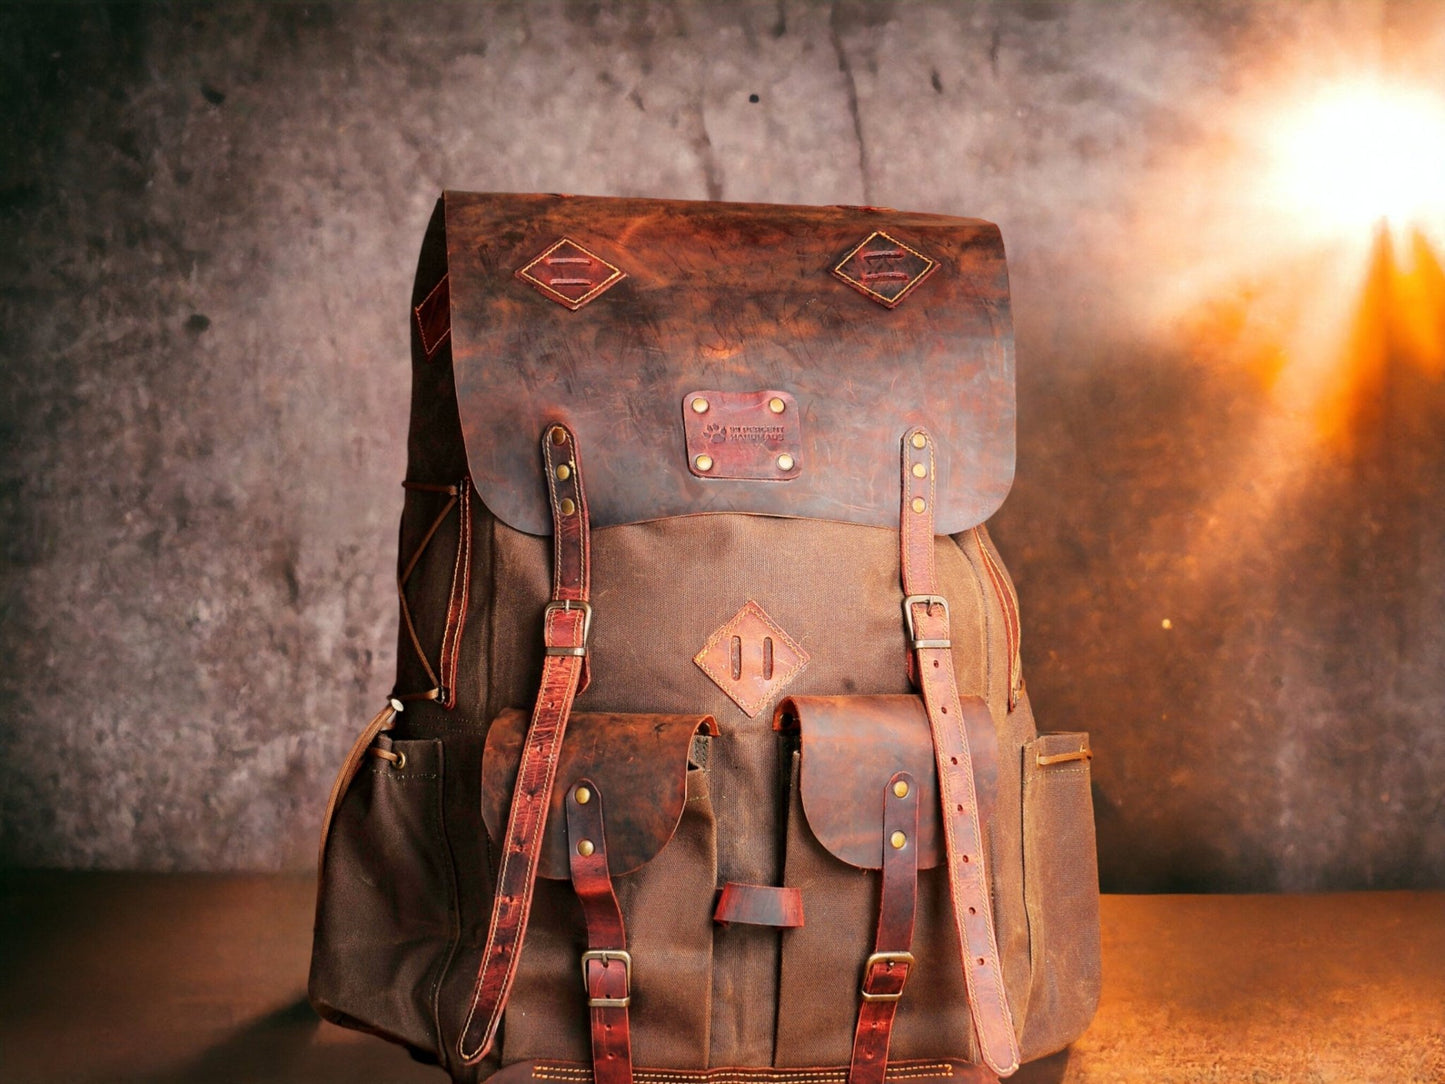 Camping Backpack | Bushcraft Bacpack | Hiking Backpack | Personalized | Travel Backpack | Canvas Leather | Camping-Hiking-Bushcraft-Travel  99percenthandmade   